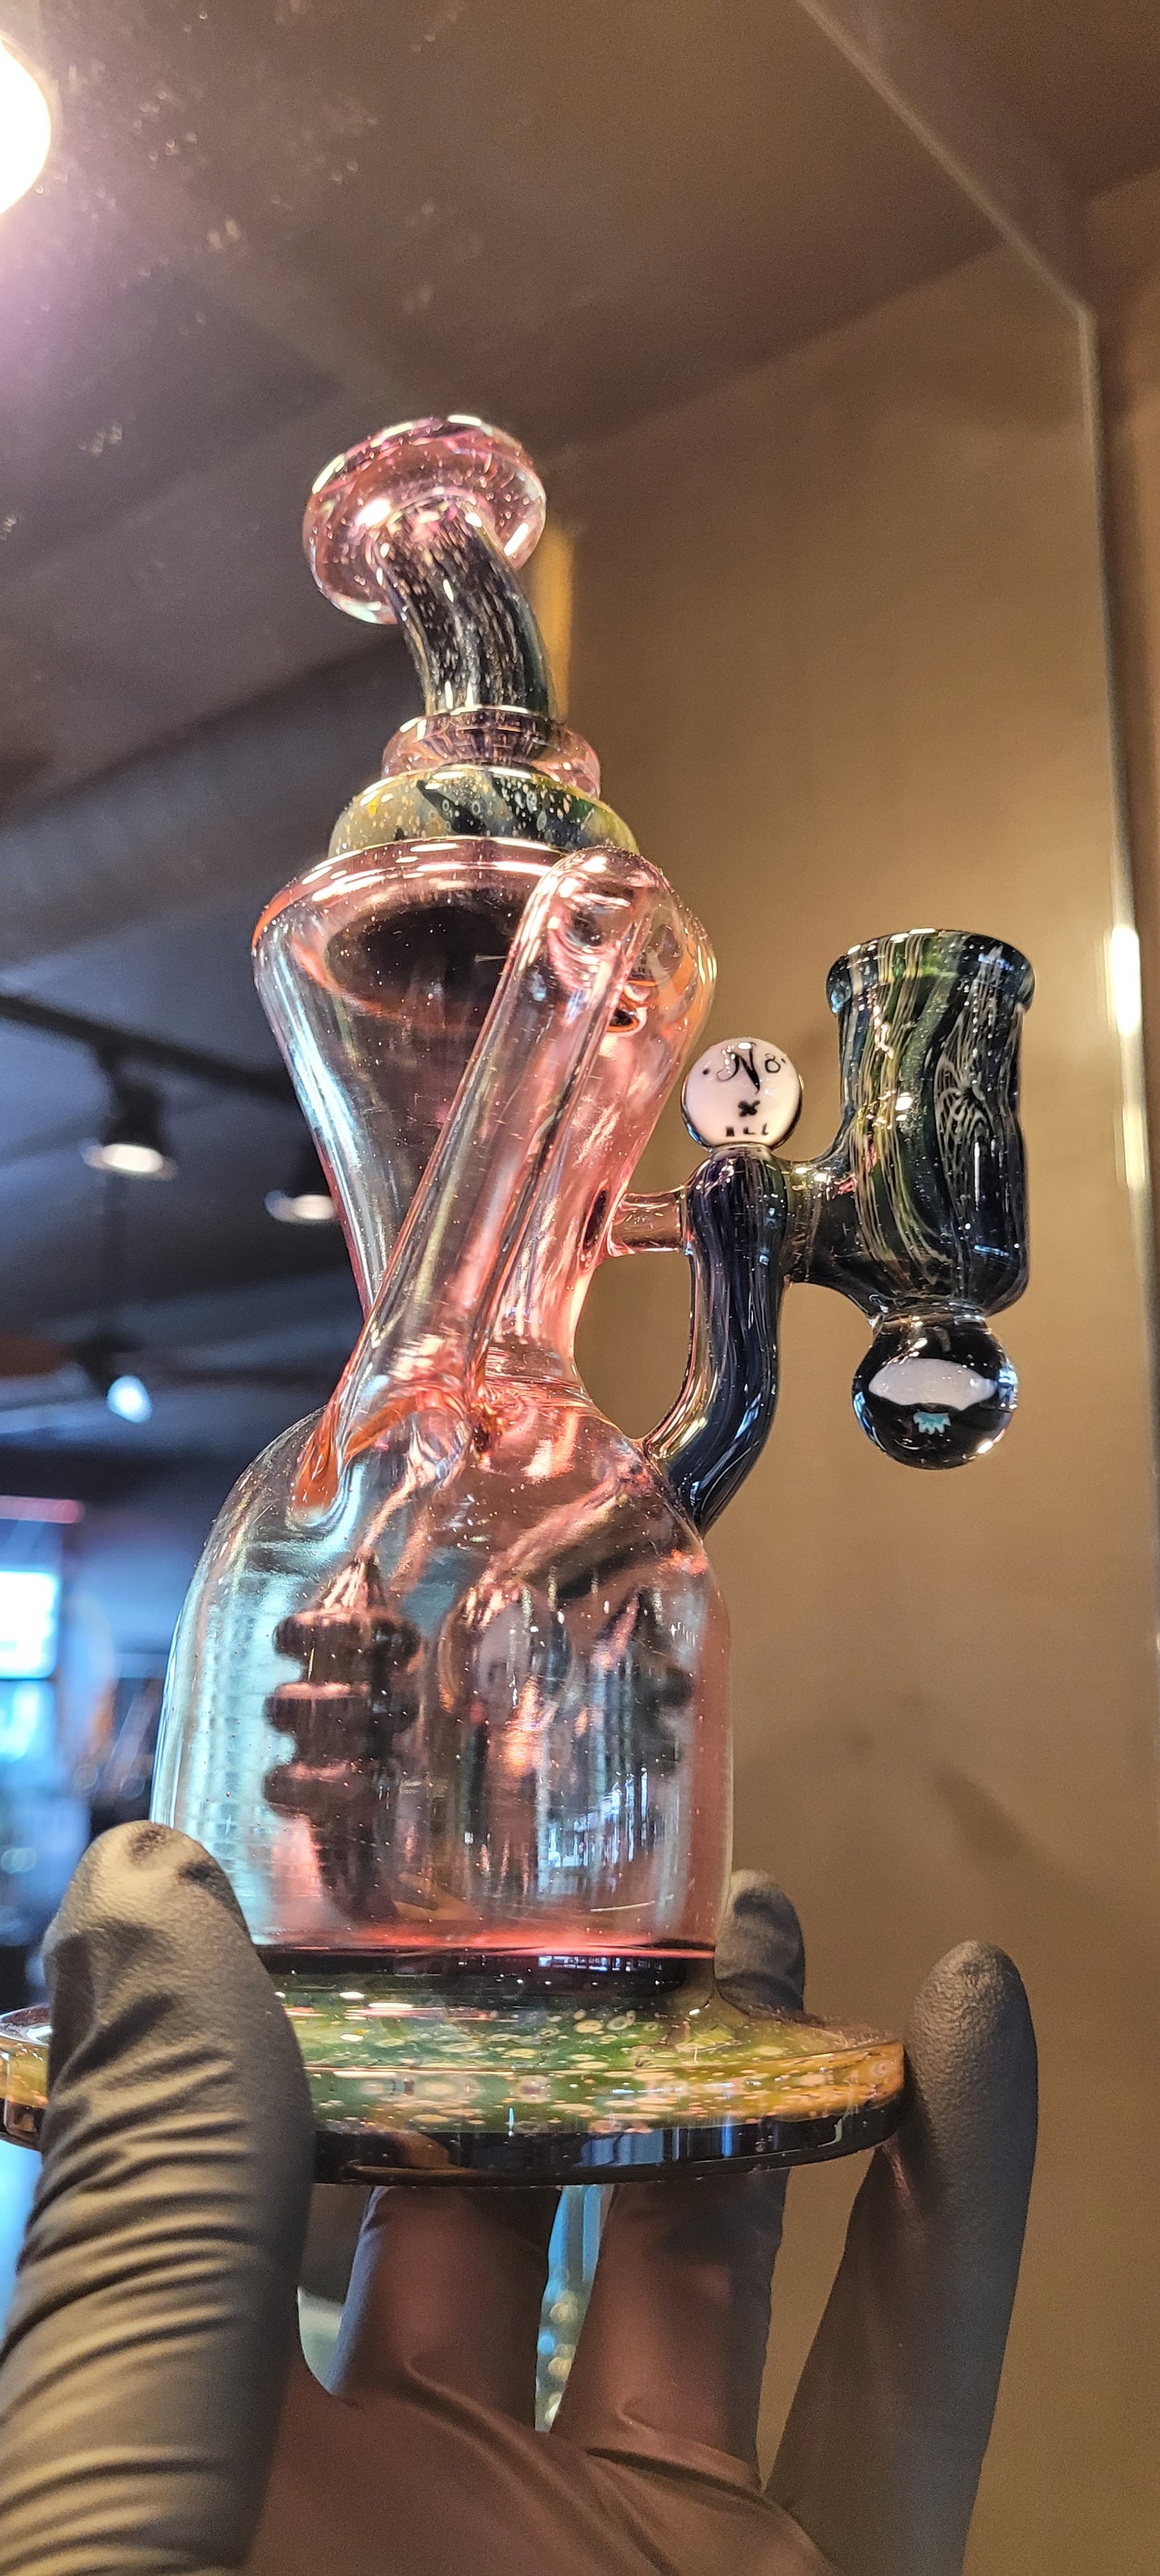 Serum Flux Satellite Vapor Bubbler Collaboration by Ill Glass and Nathan (N8) Miers